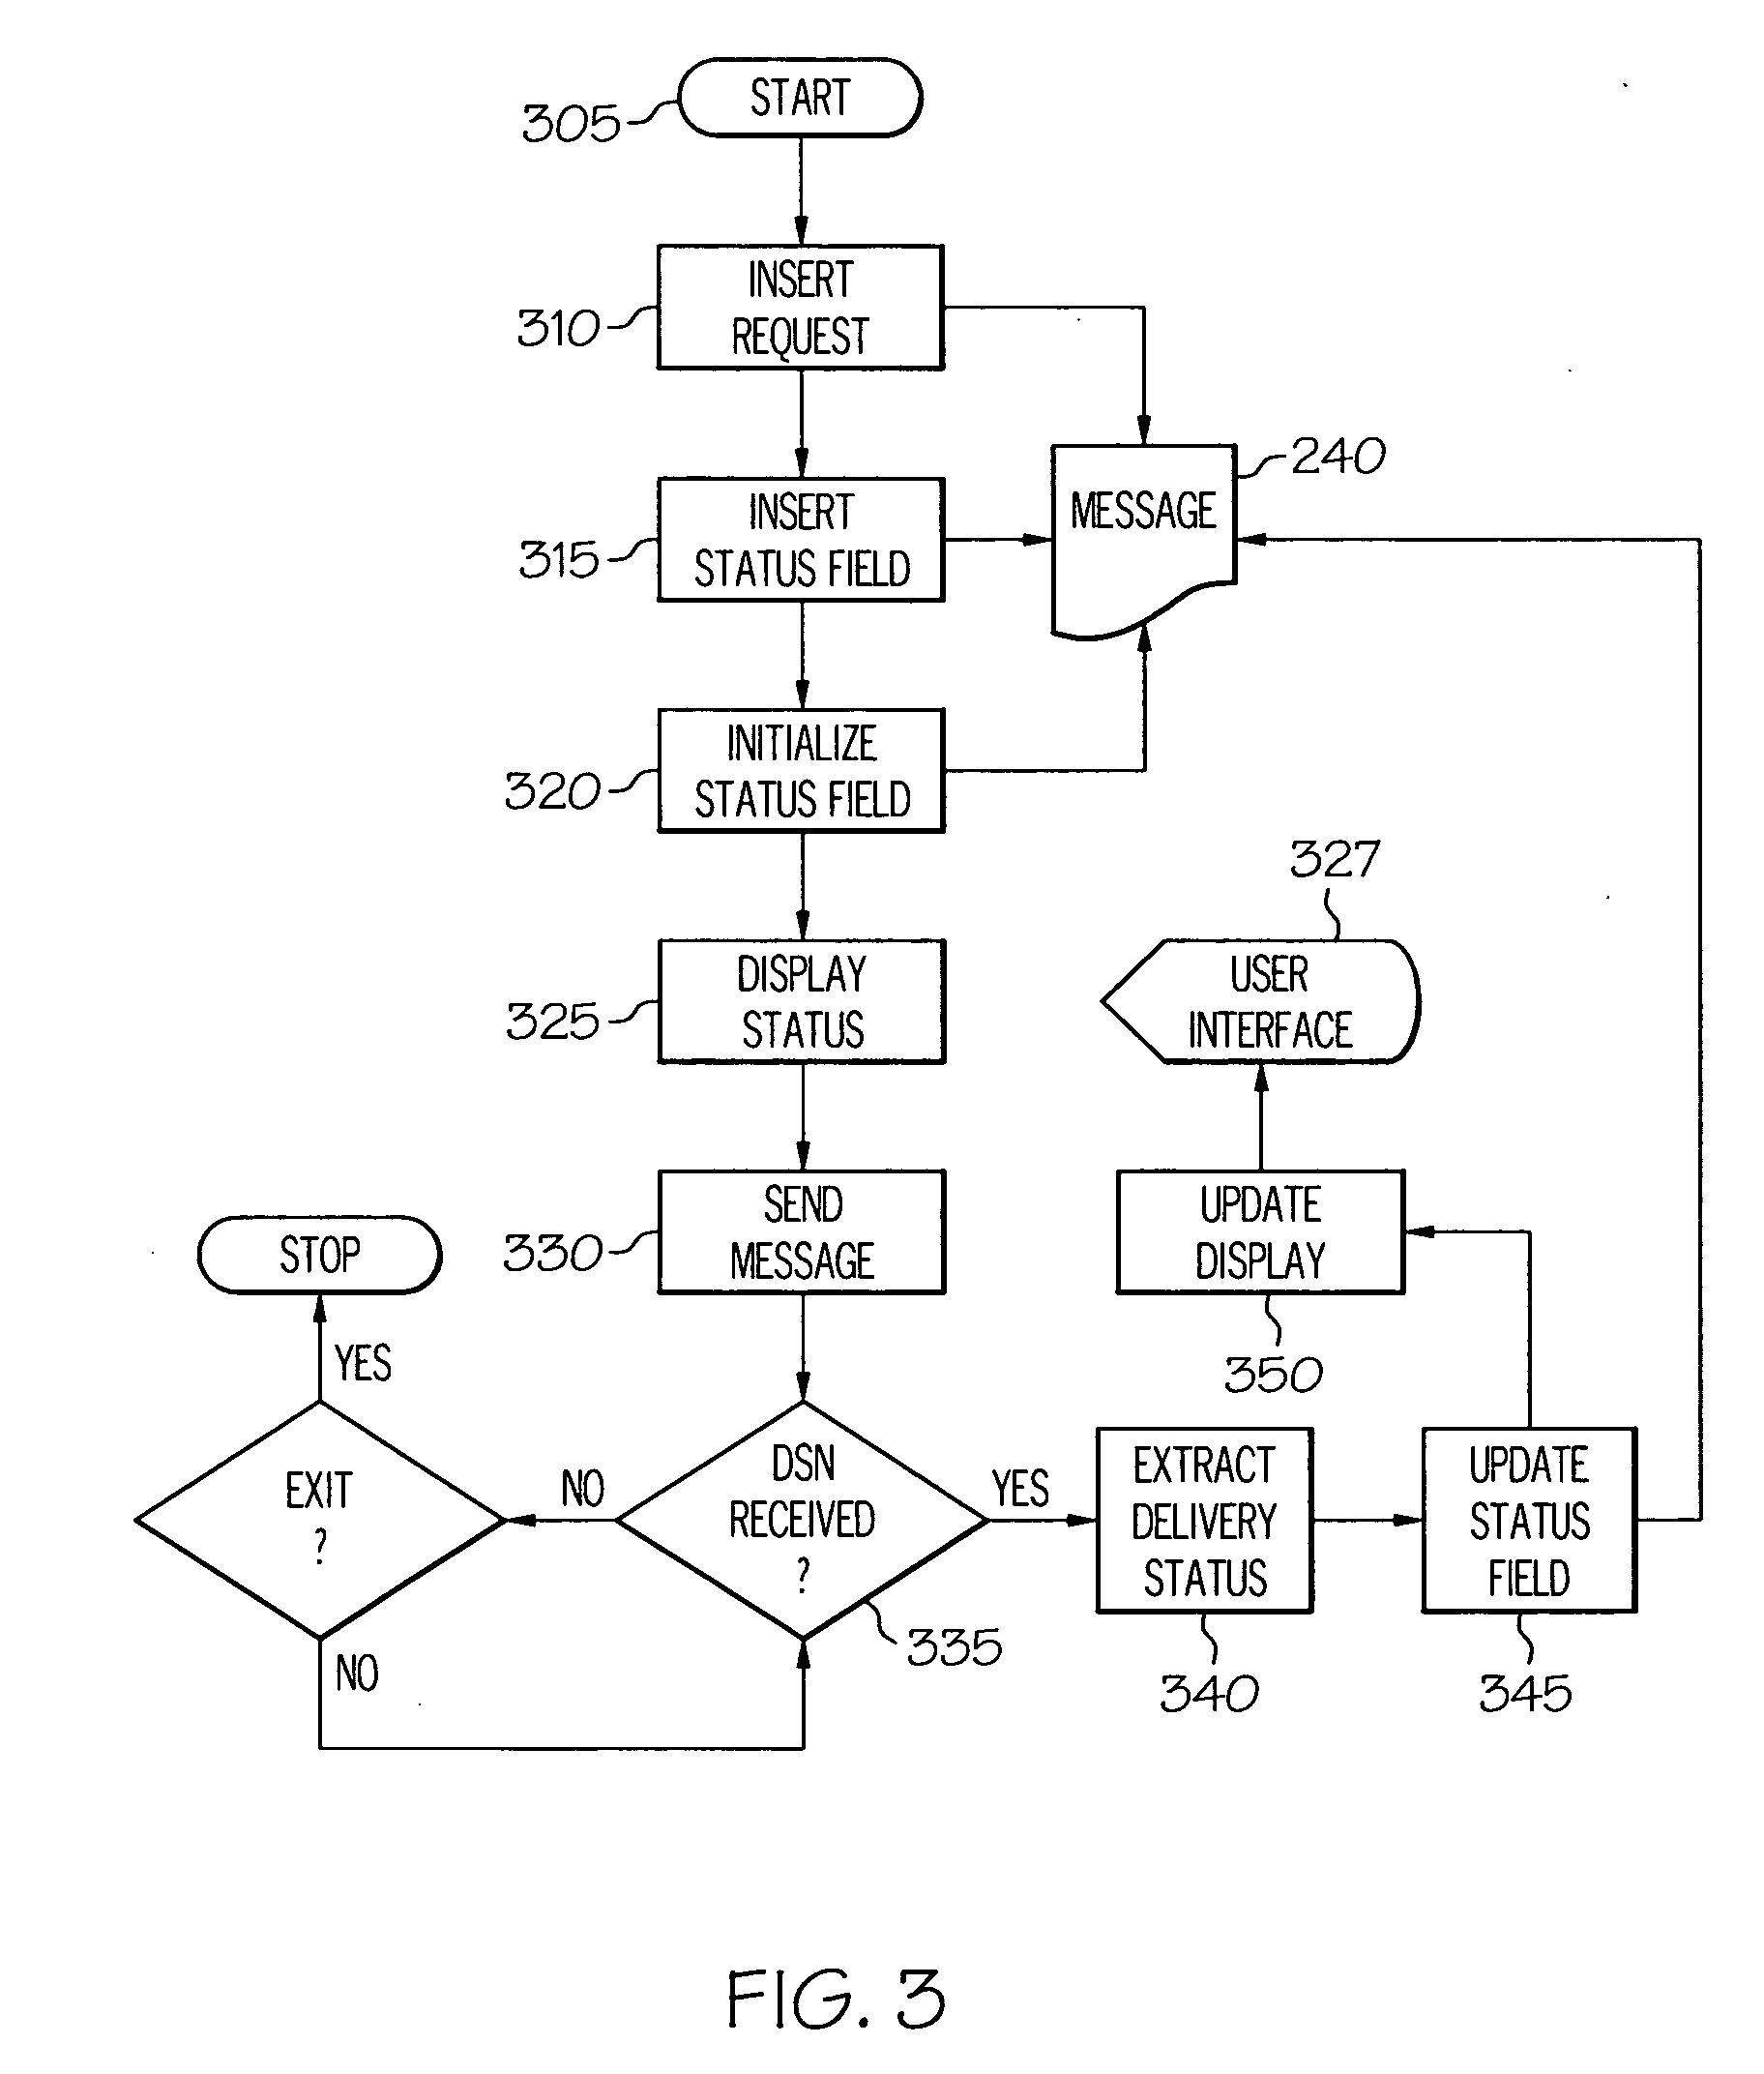 System and process for delivery status notification